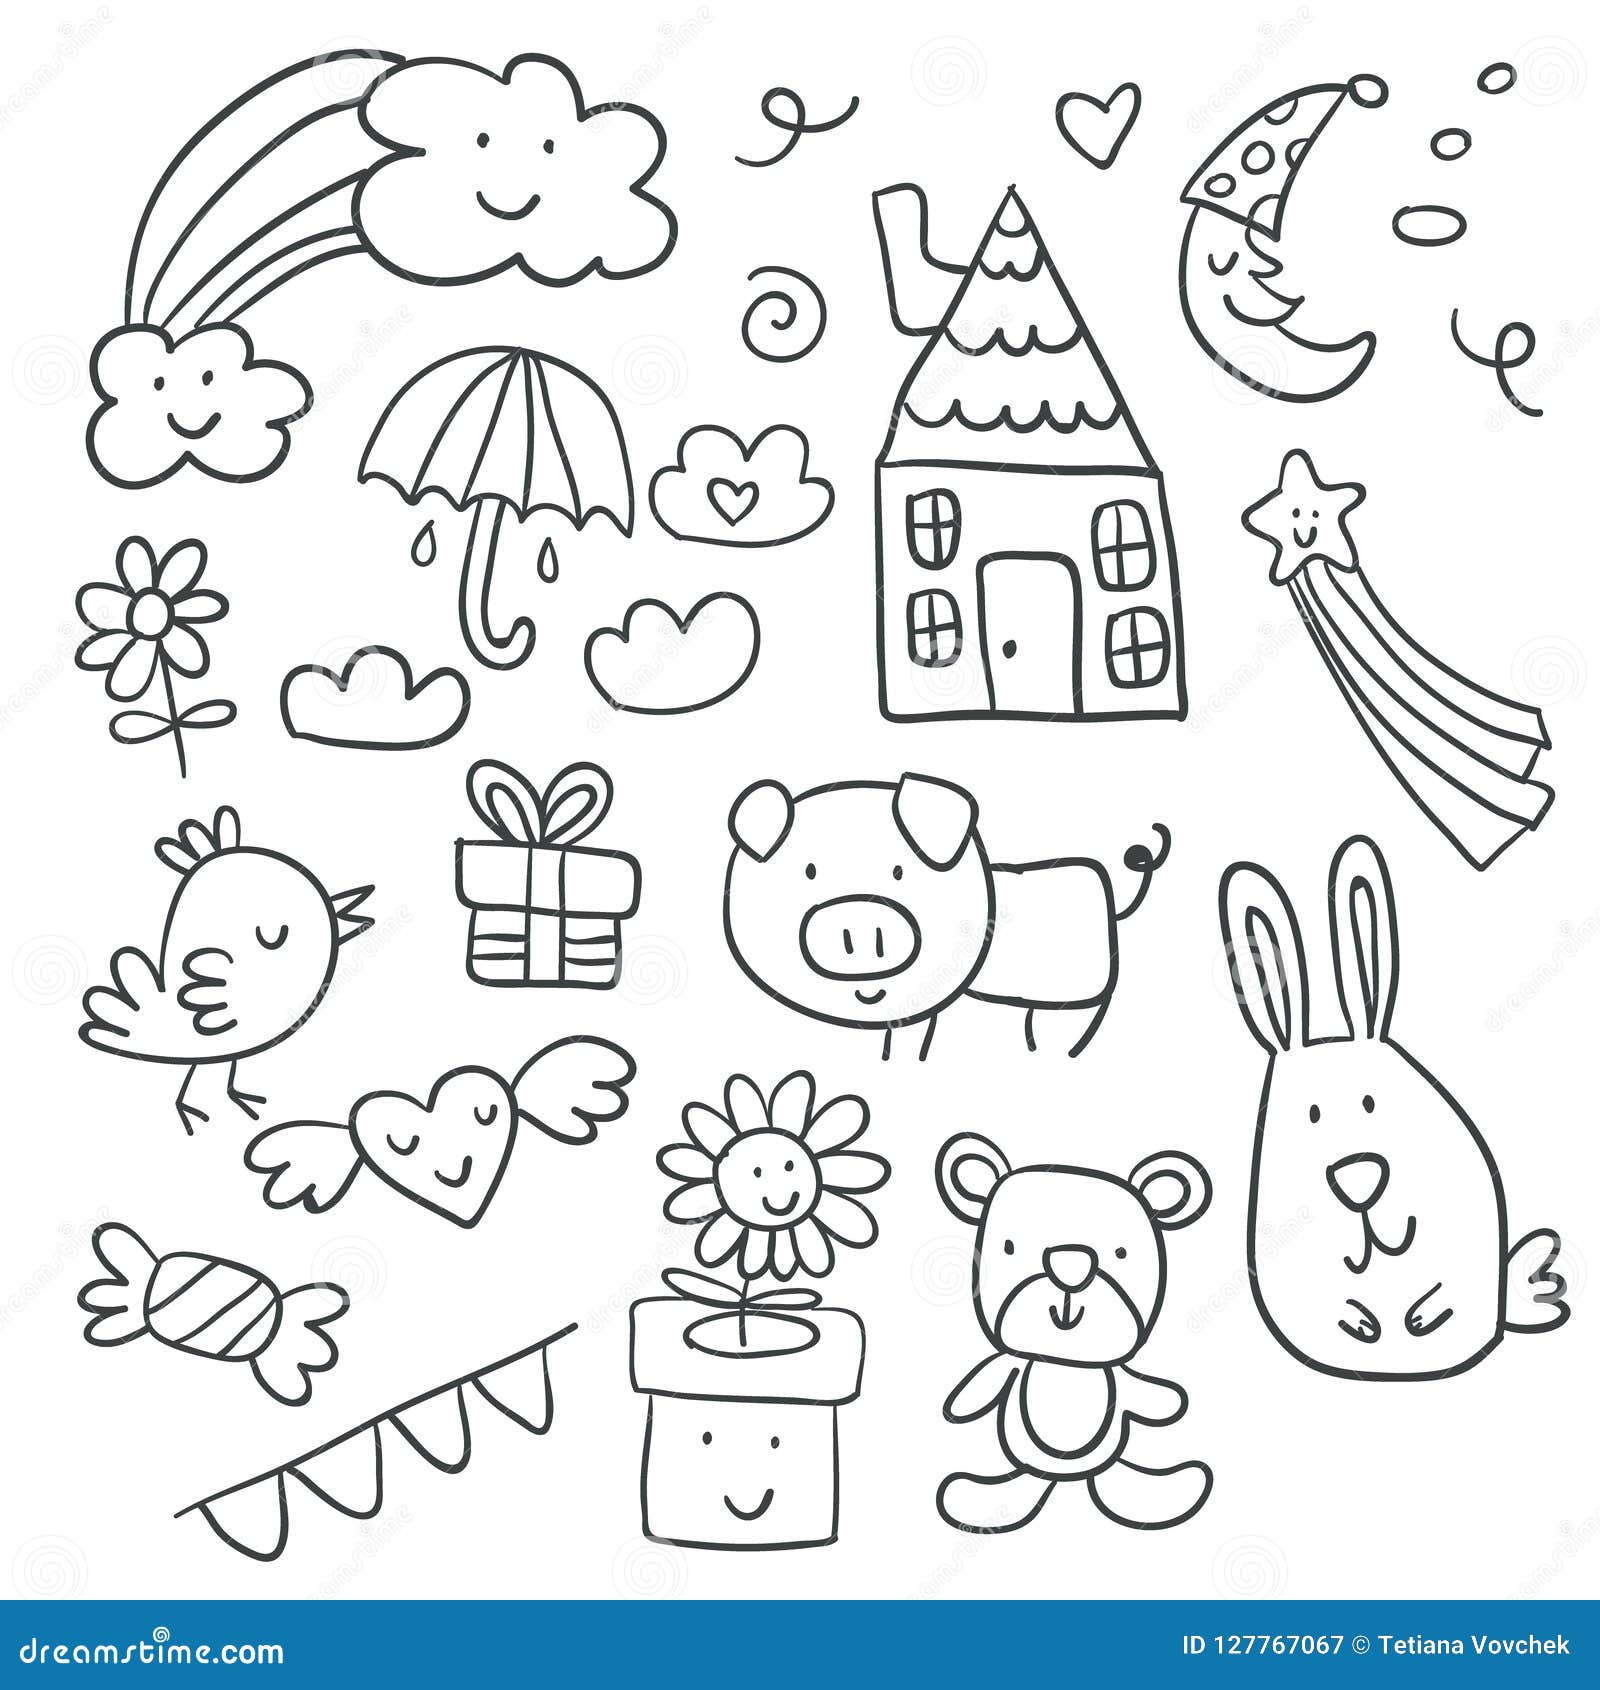 https://thumbs.dreamstime.com/z/collection-cute-children-s-drawings-kids-collection-cute-children-s-drawings-kids-animals-nature-objects-vector-127767067.jpg